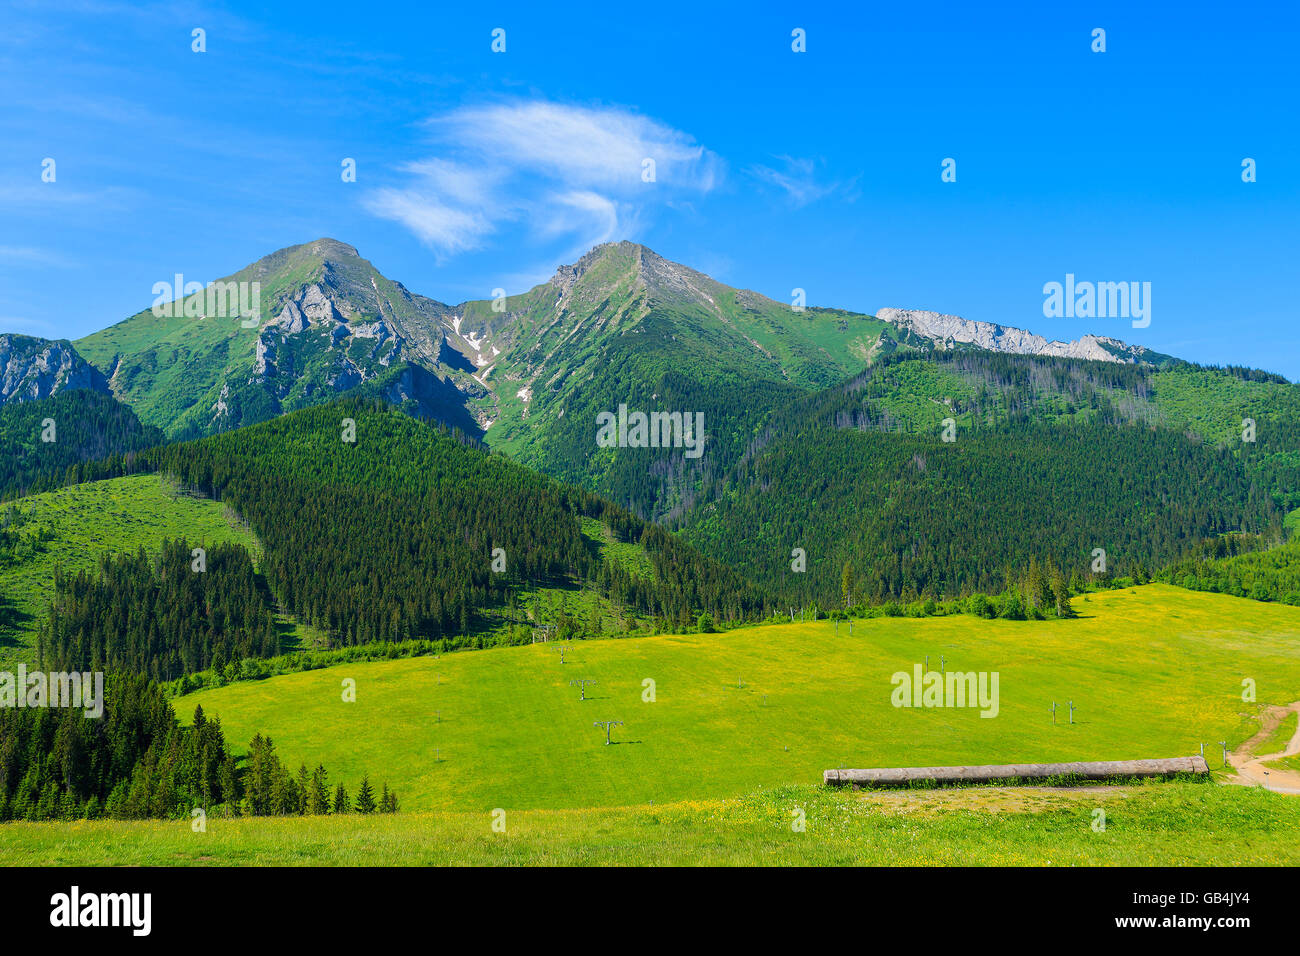 View of mountain peaks and green meadow in summer landscape of Tatra Mountains, Slovakia Stock Photo